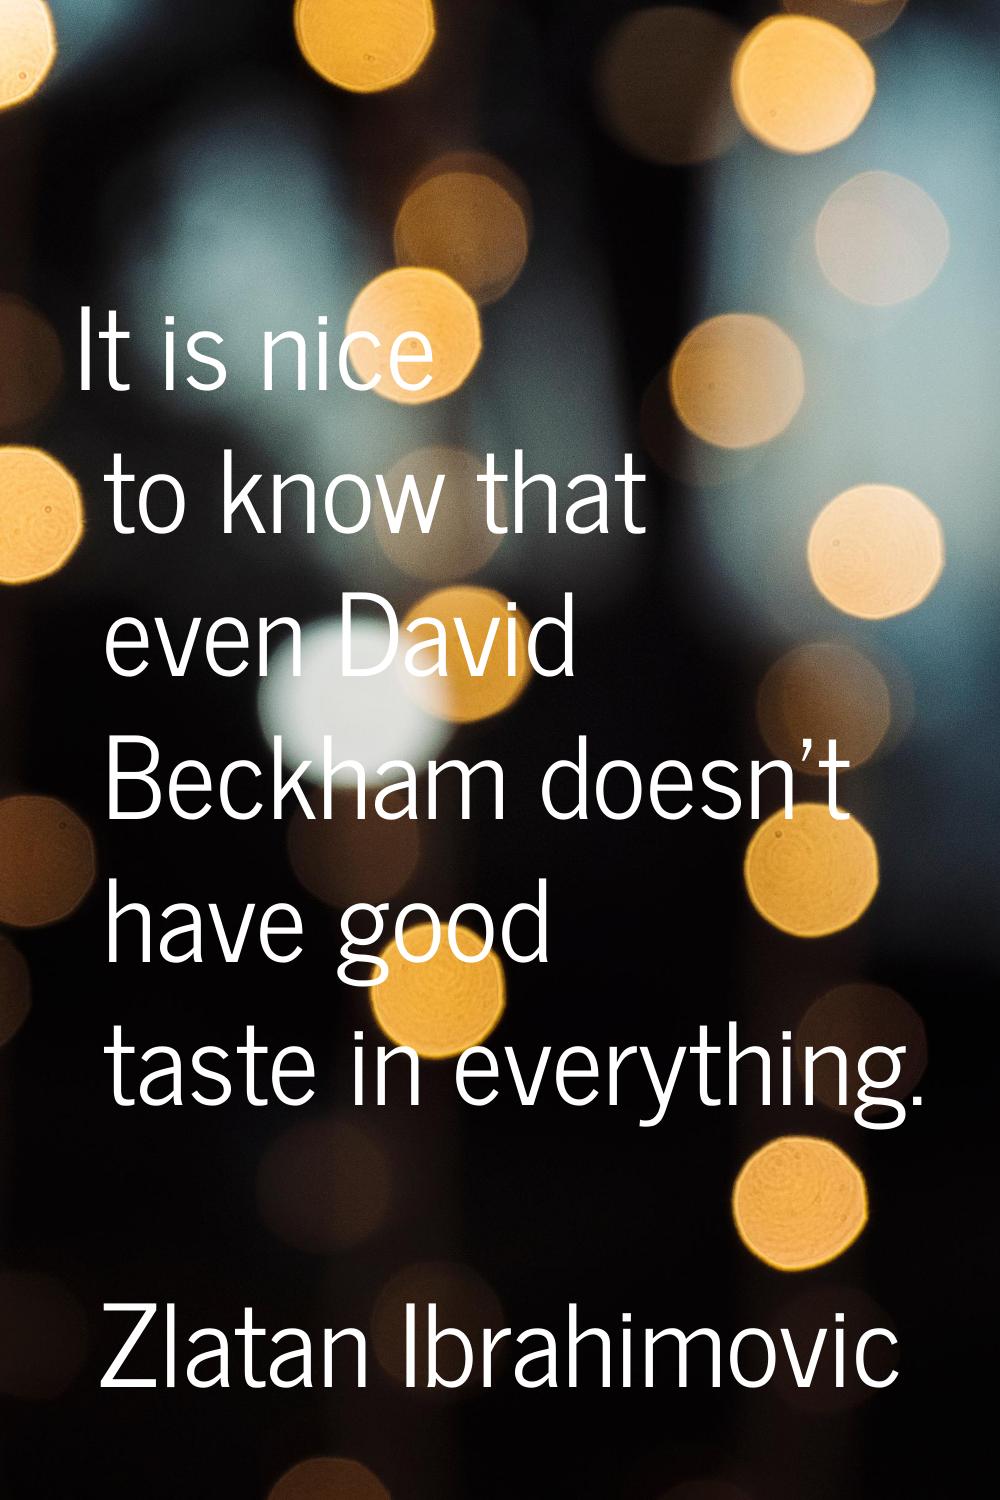 It is nice to know that even David Beckham doesn't have good taste in everything.